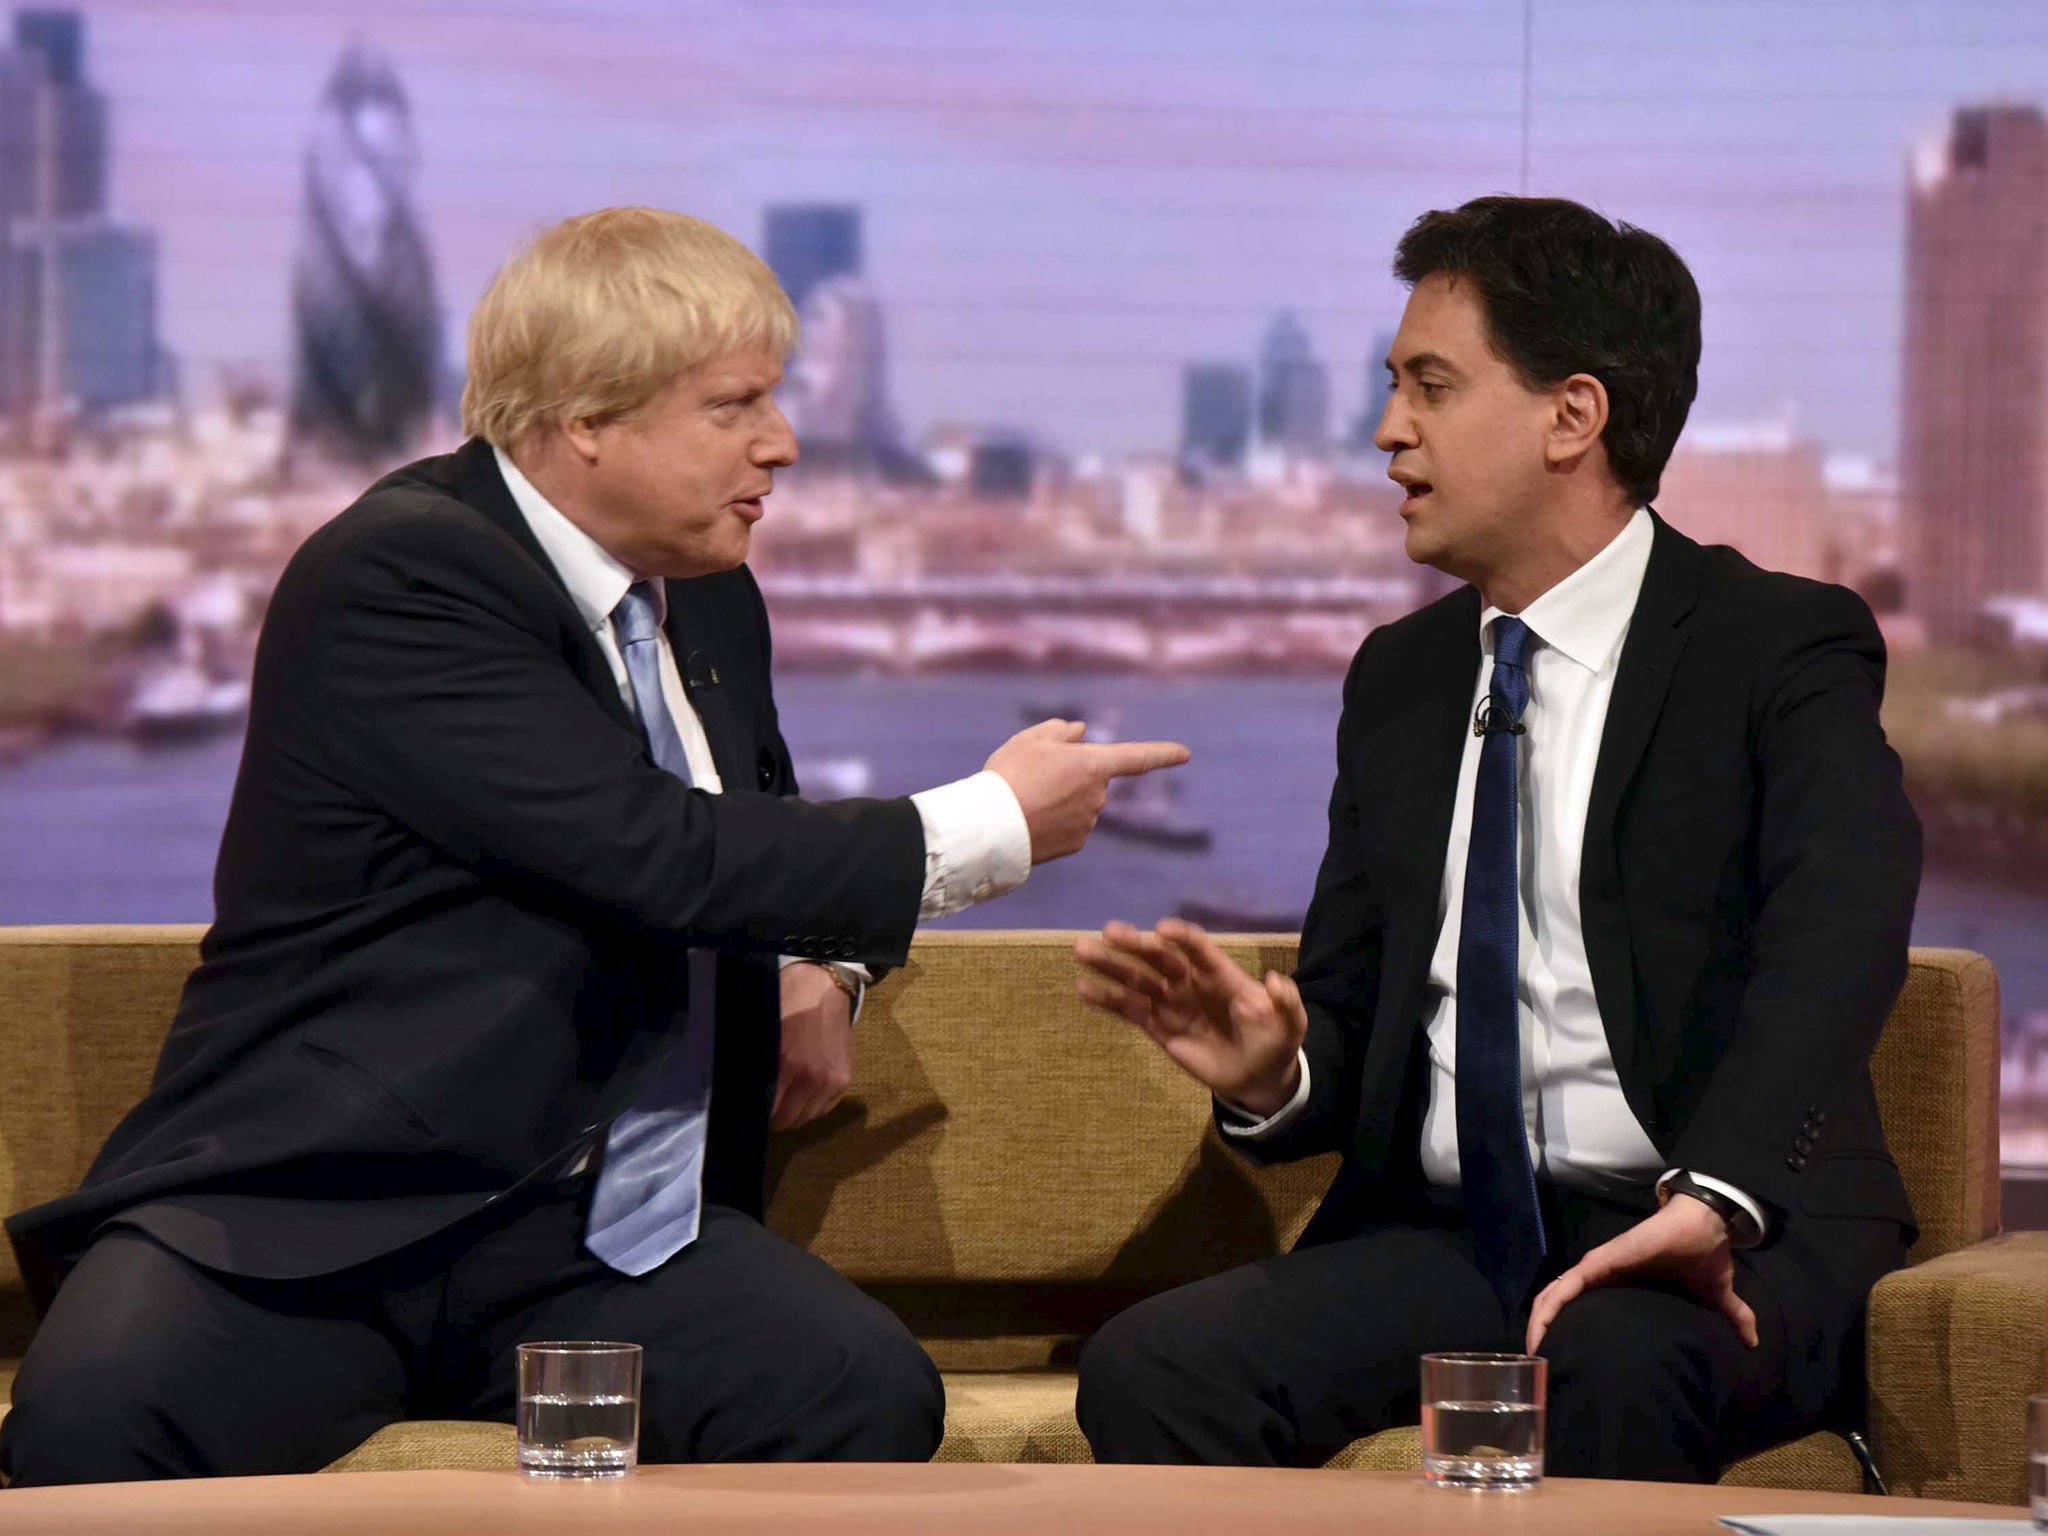 Britain's opposition Labour Party leader Ed Miliband (R) and Boris Johnson, mayor of London, talk on the Andrew Marr show in London April 26